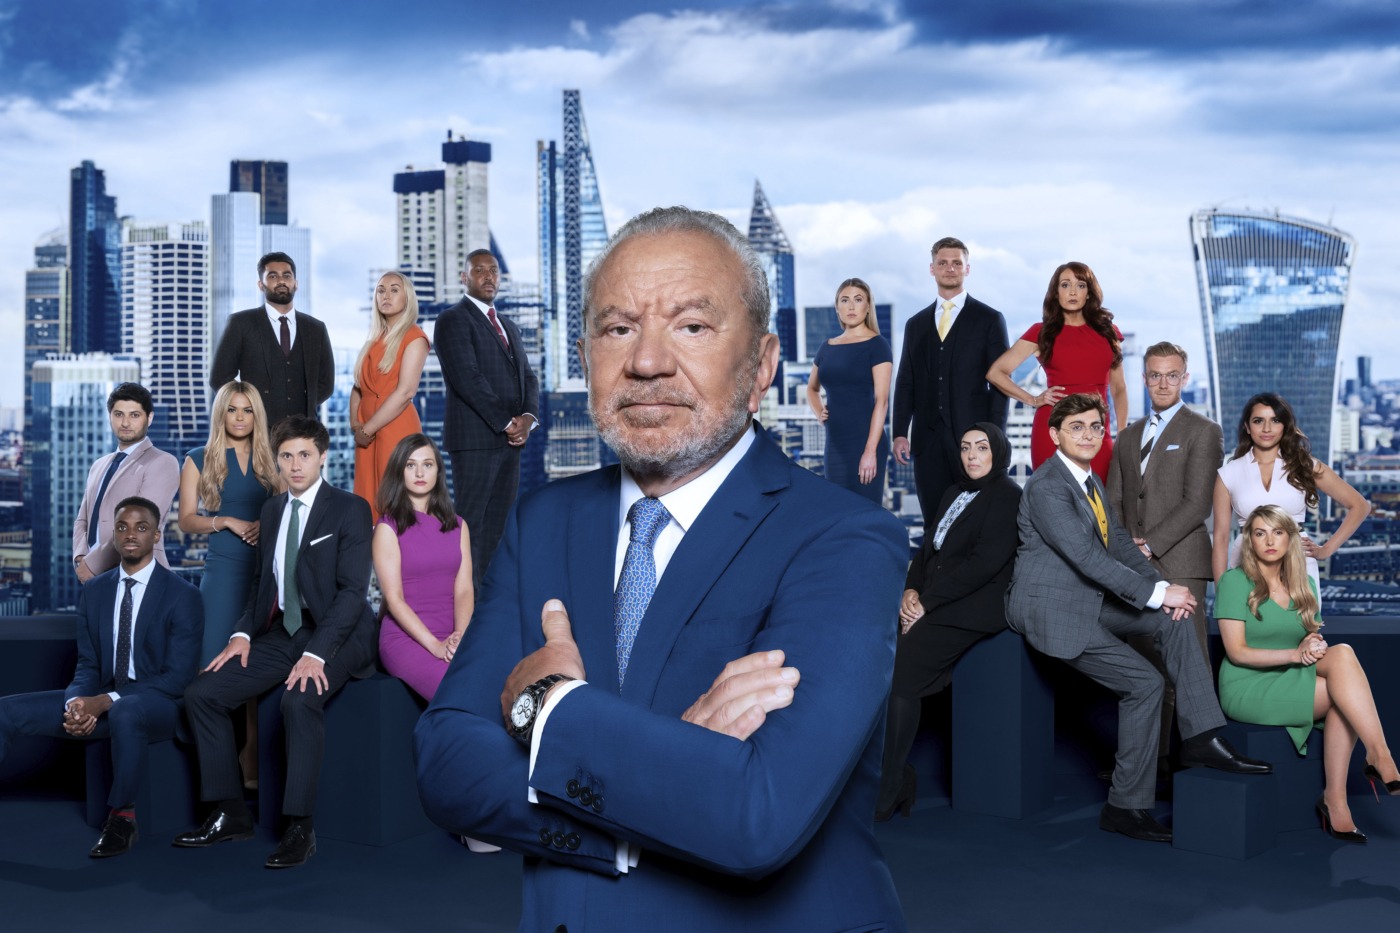 ‘The Apprentice’: time to let go? - The Boar